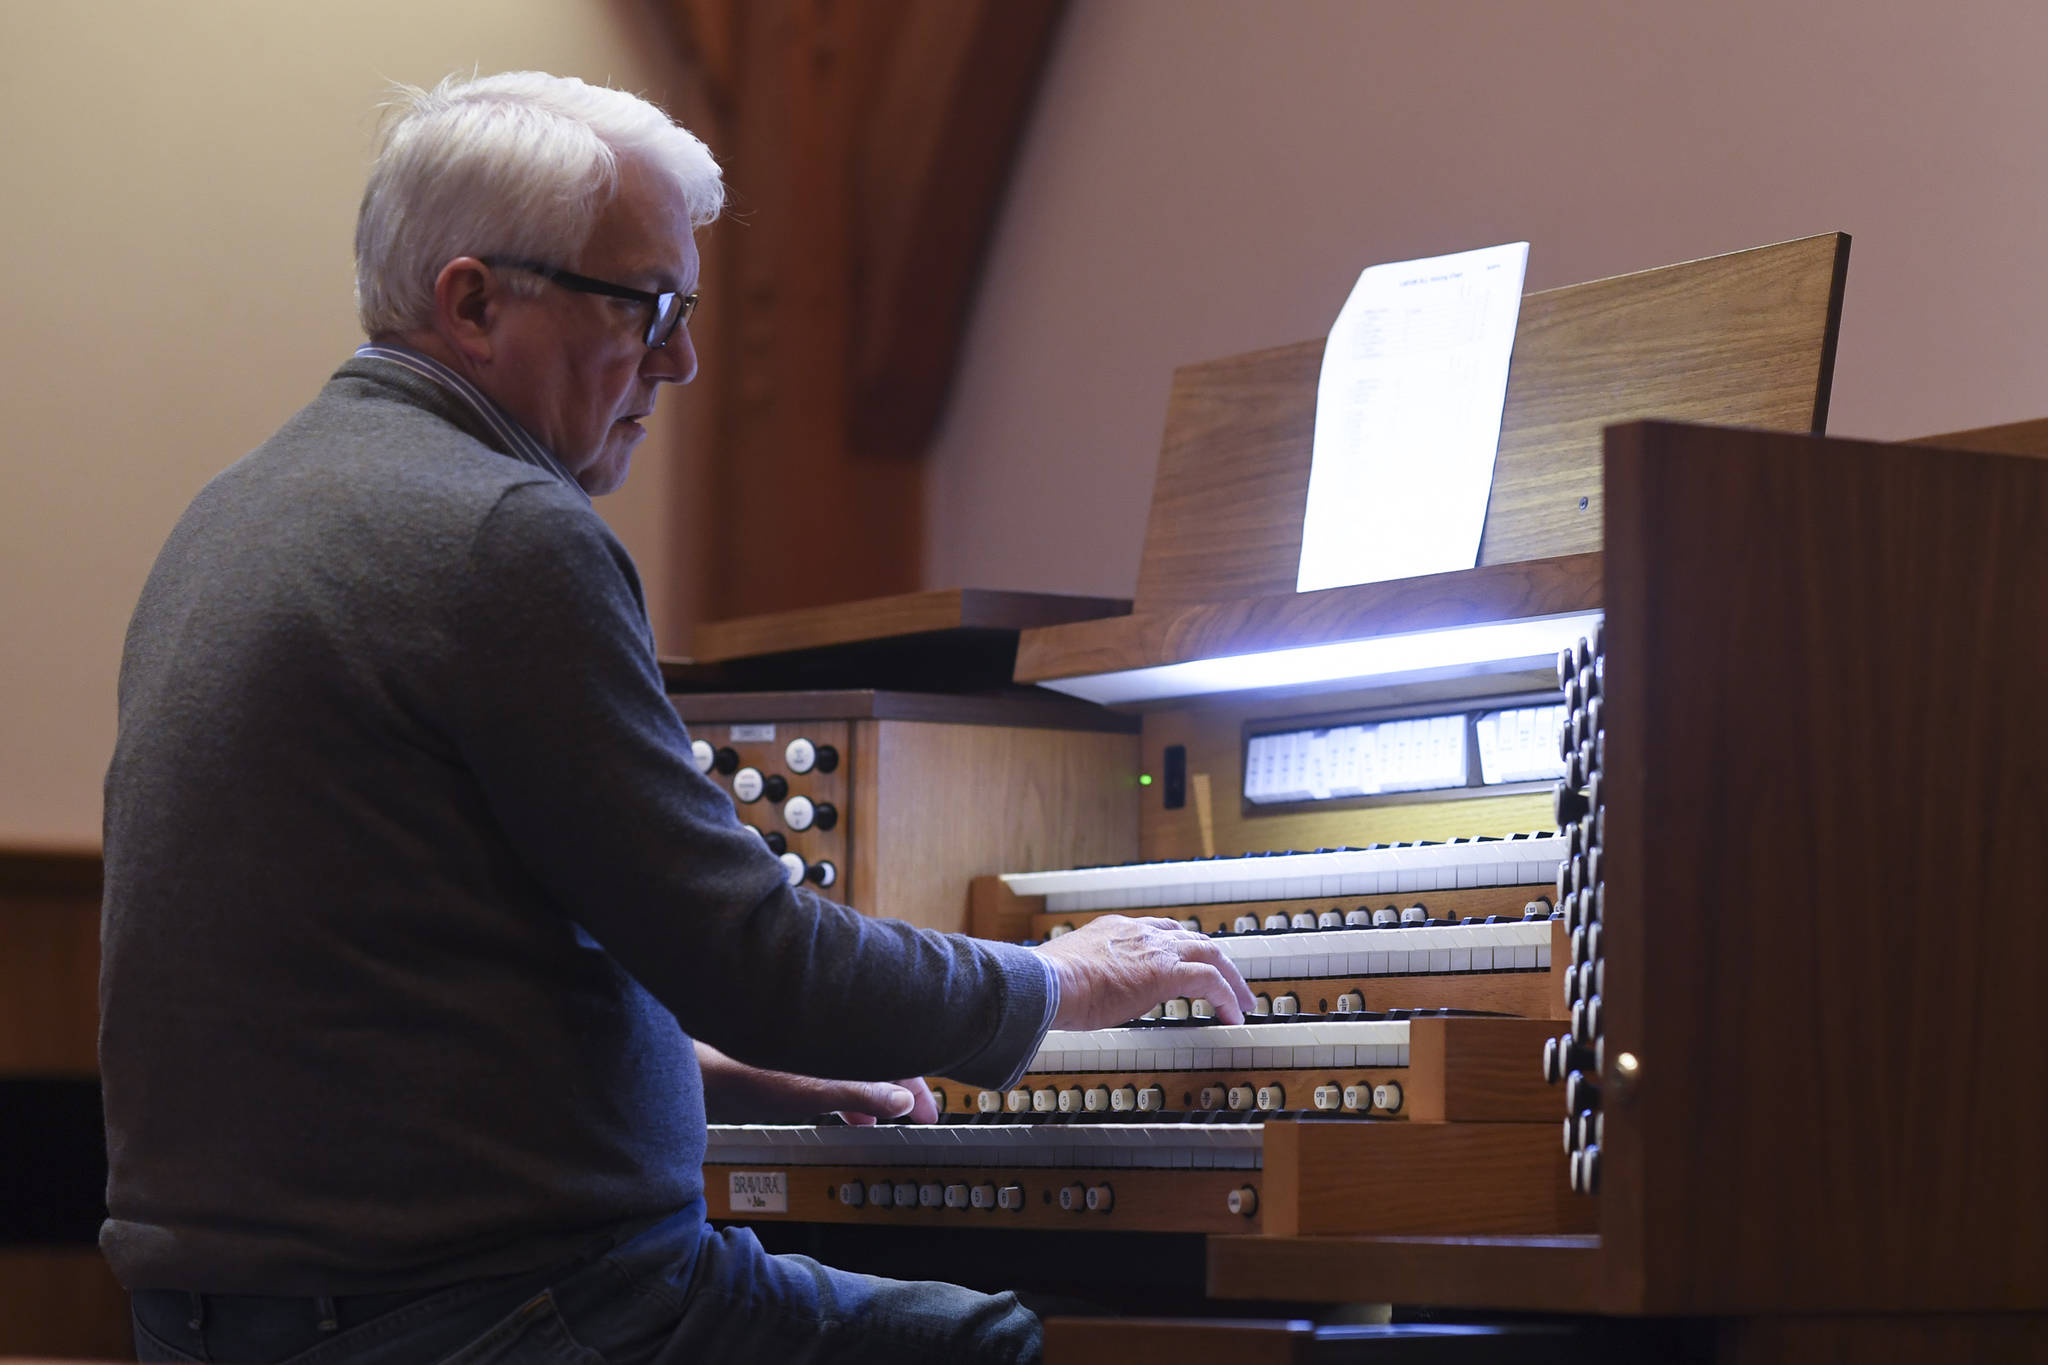 Jonas Nordwall, organist and artistic director of music for the First United Methodist Church in Portland, Oregon, works on Thursday at preparing a 2013 Allen Bravura Organ for its first public concert at Holy Trinity Episcopal Church. Learn more by watching the video below. (Michael Penn | Juneau Empire)